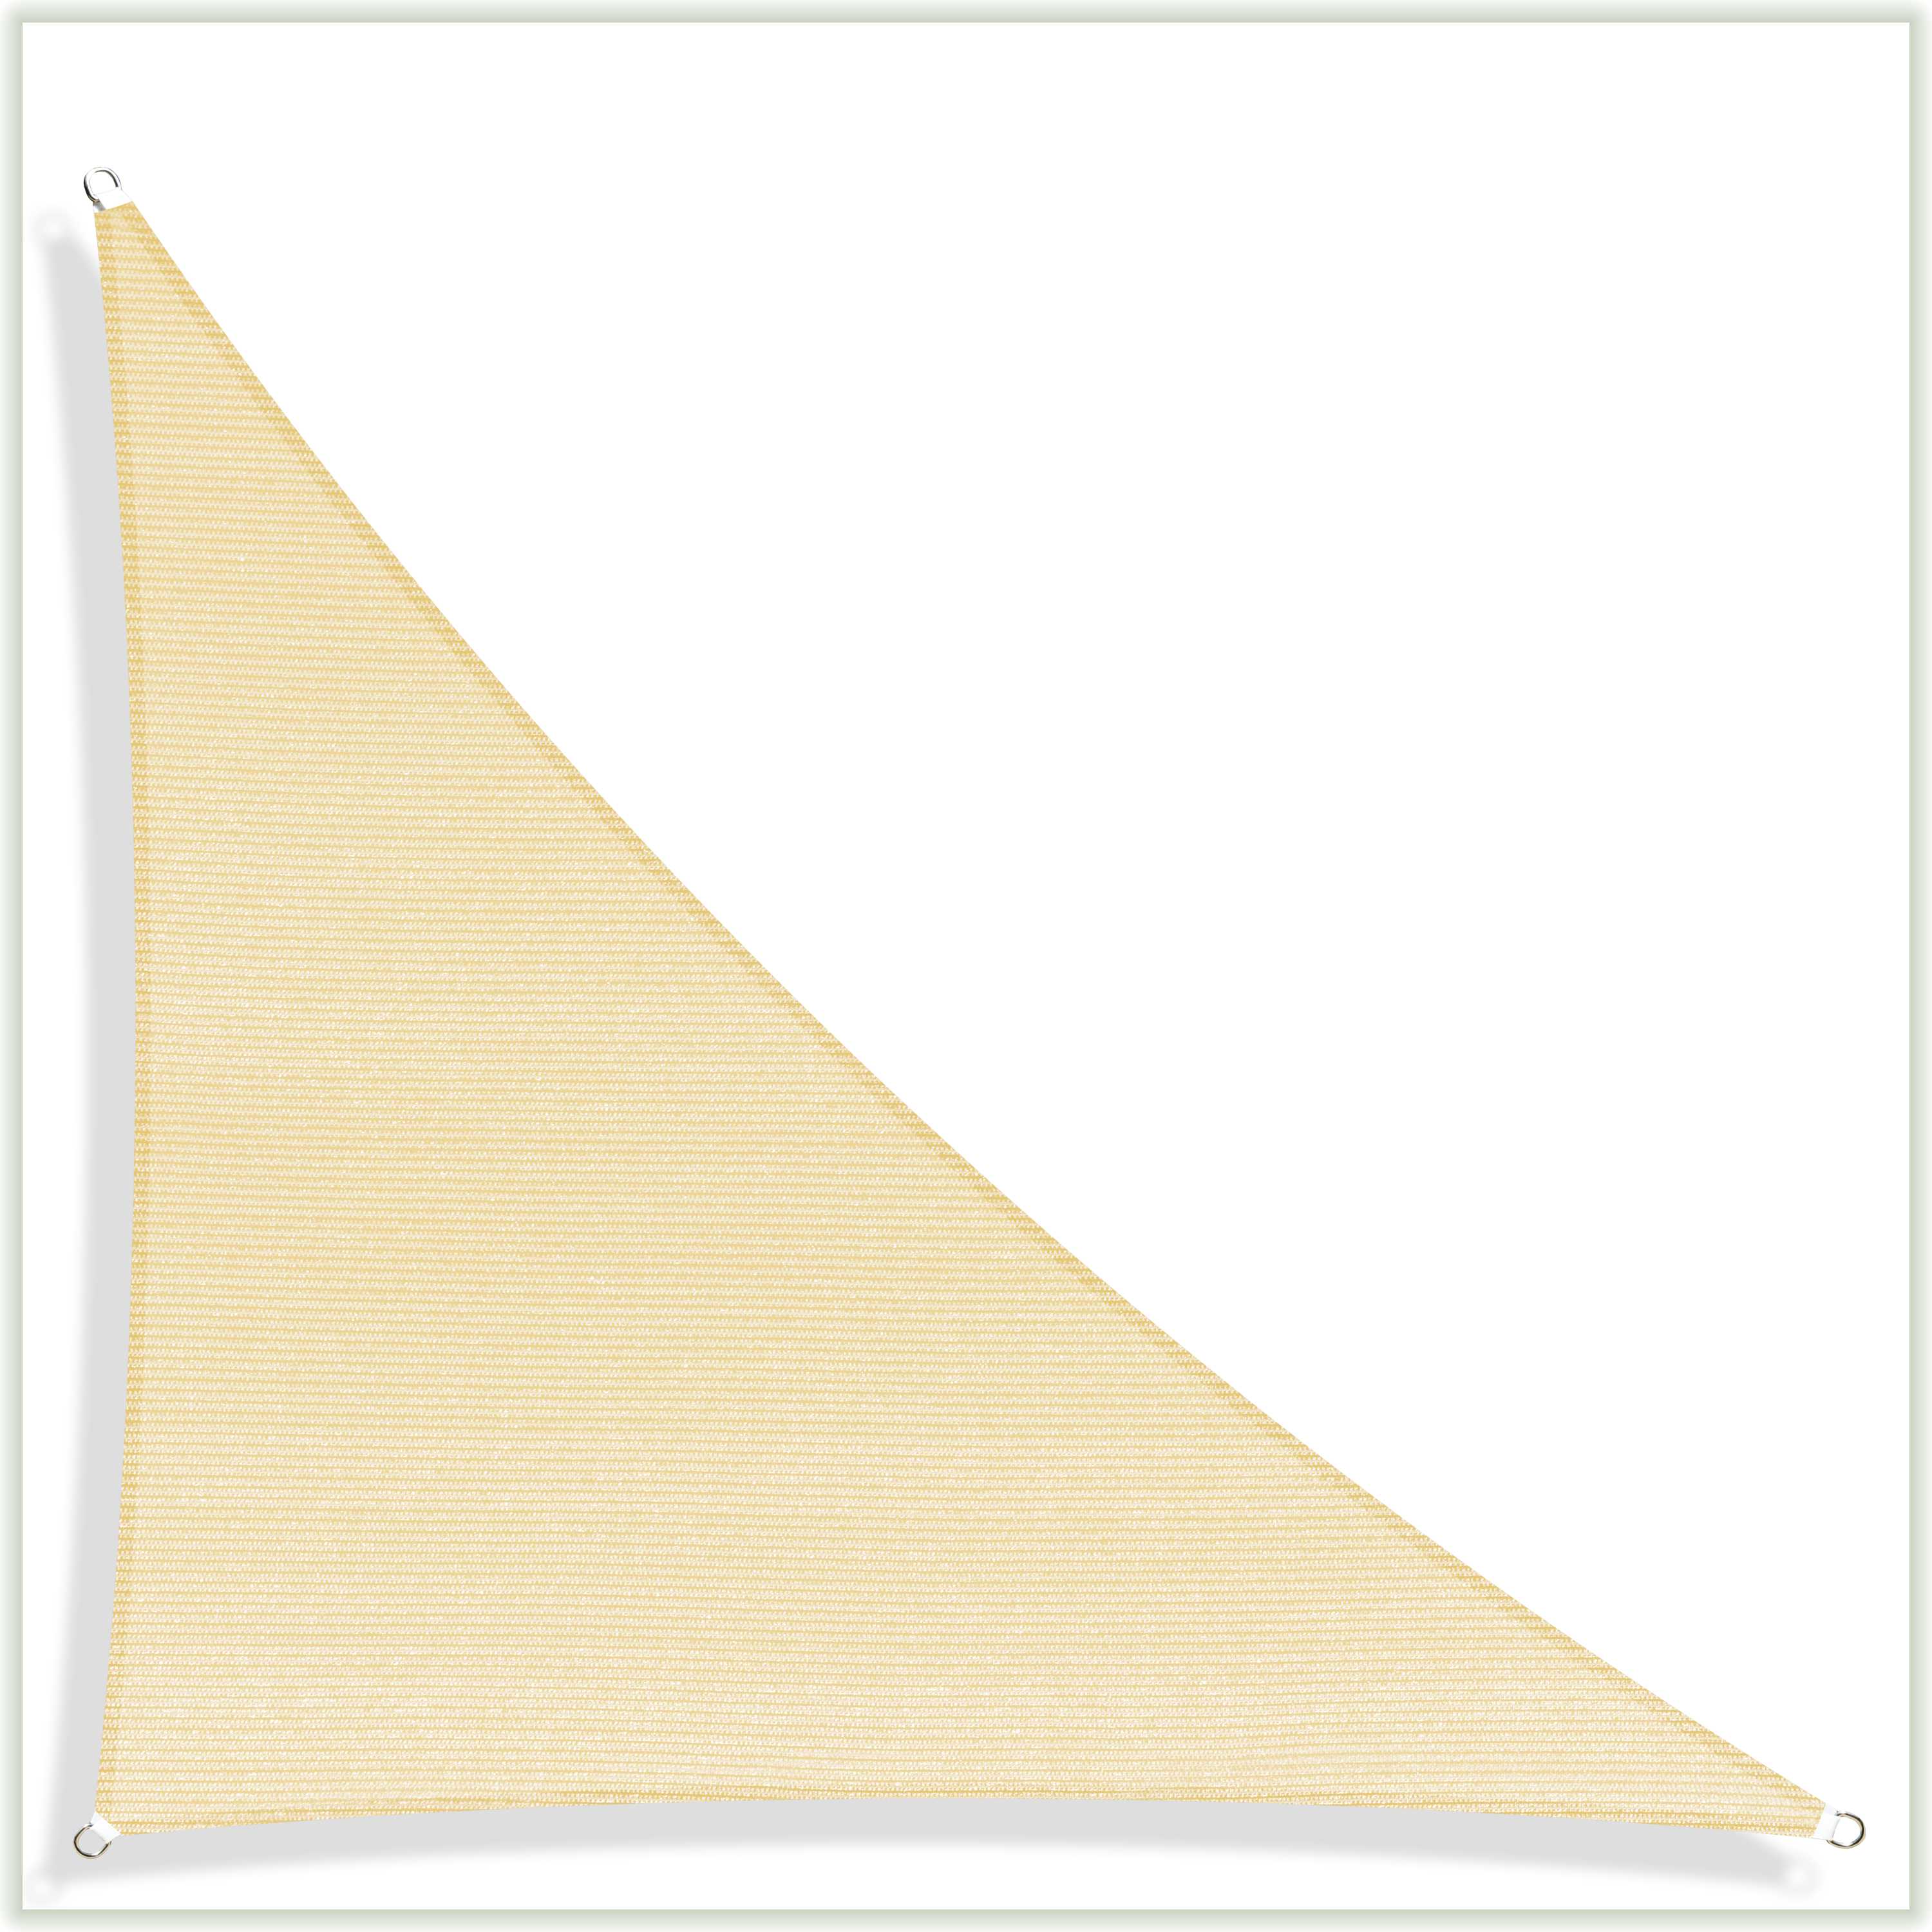 ColourTree 20' x 20' x 28.3' Beige Right Triangle Sun Shade Sail Canopy Mesh Fabric UV Block - Commercial Heavy Duty - 190 GSM - 3 Years Warranty ( We Make Custom Size ) - image 2 of 8